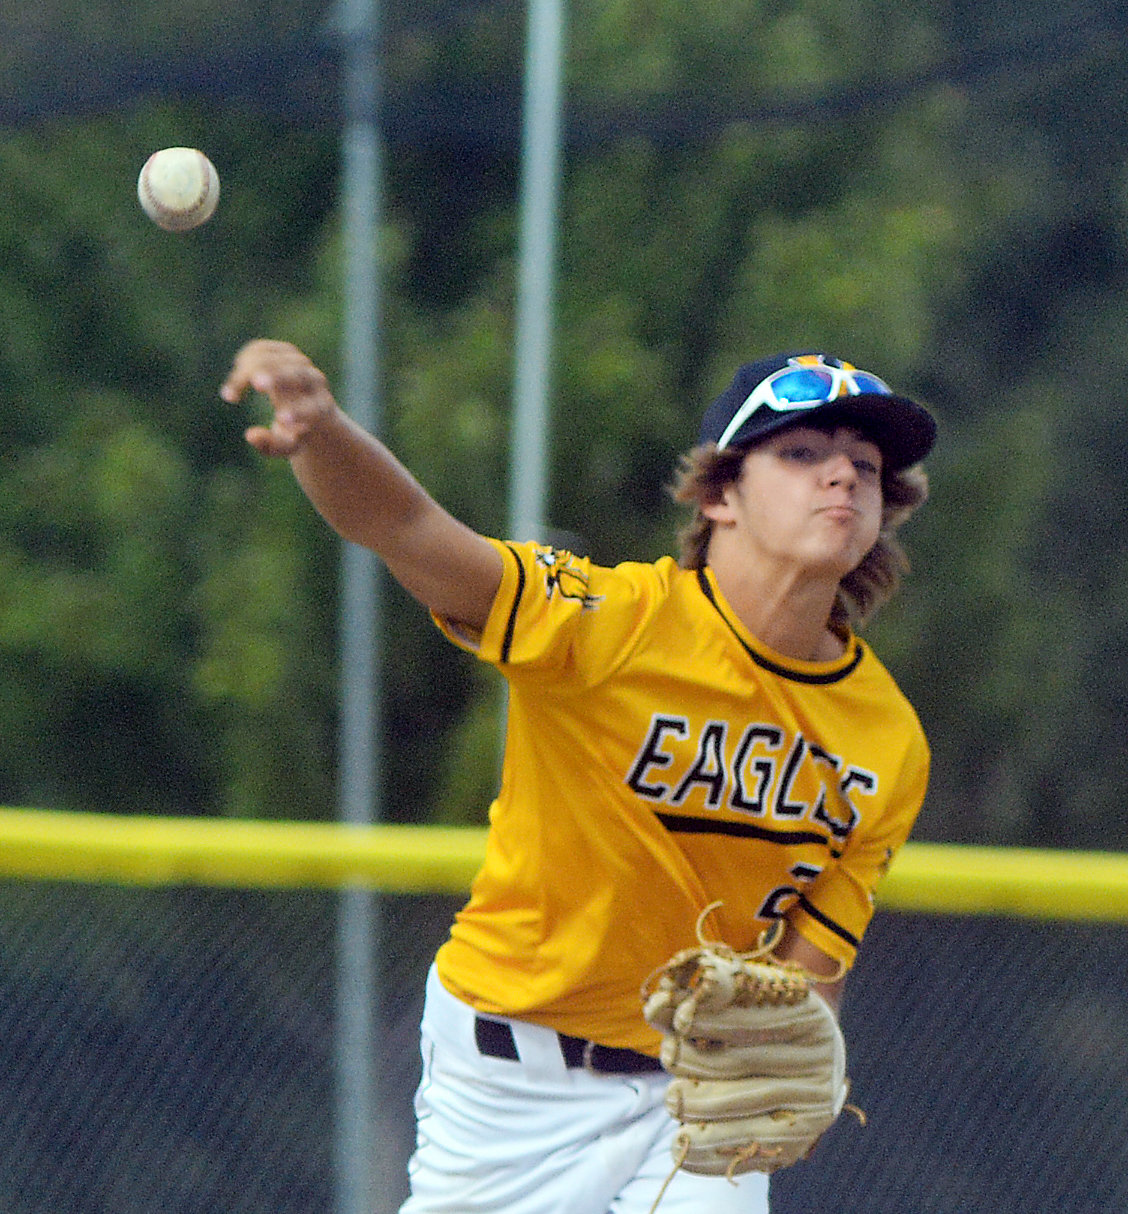 Zach Via throws the ball towards first base for Vienna’s Fall Baseball Eagles during their jamboree earlier this month.